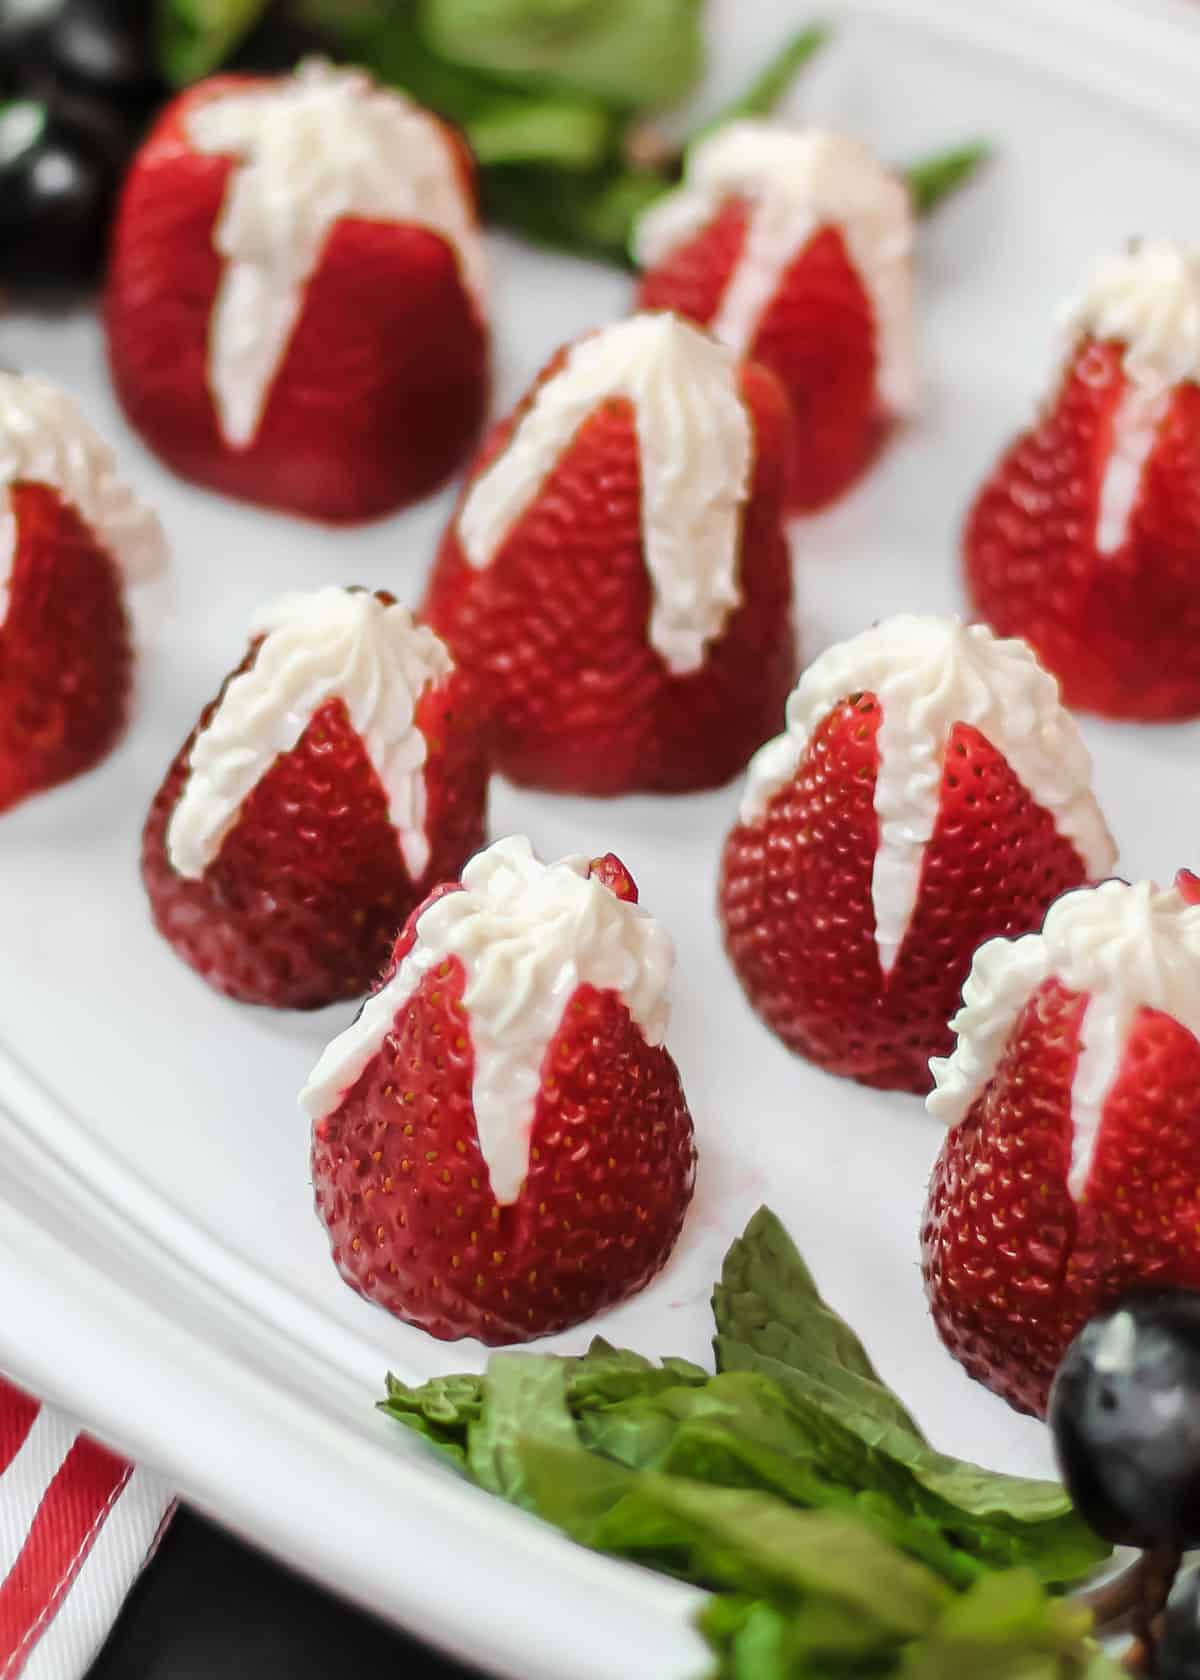 strawberries stuffed with cheesecake filling, on white platter.